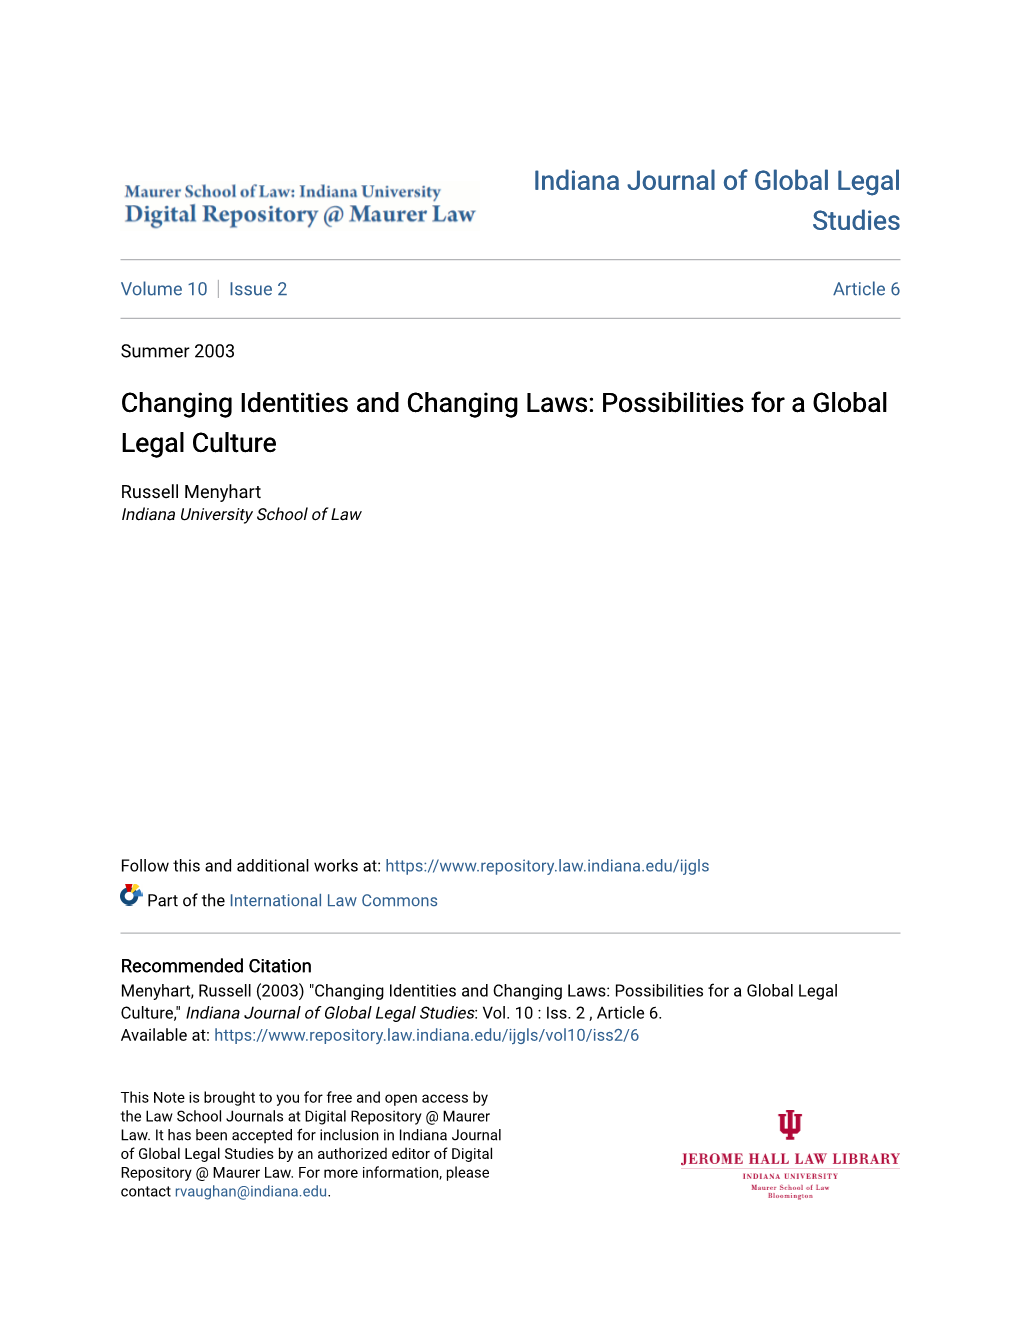 Changing Identities and Changing Laws: Possibilities for a Global Legal Culture